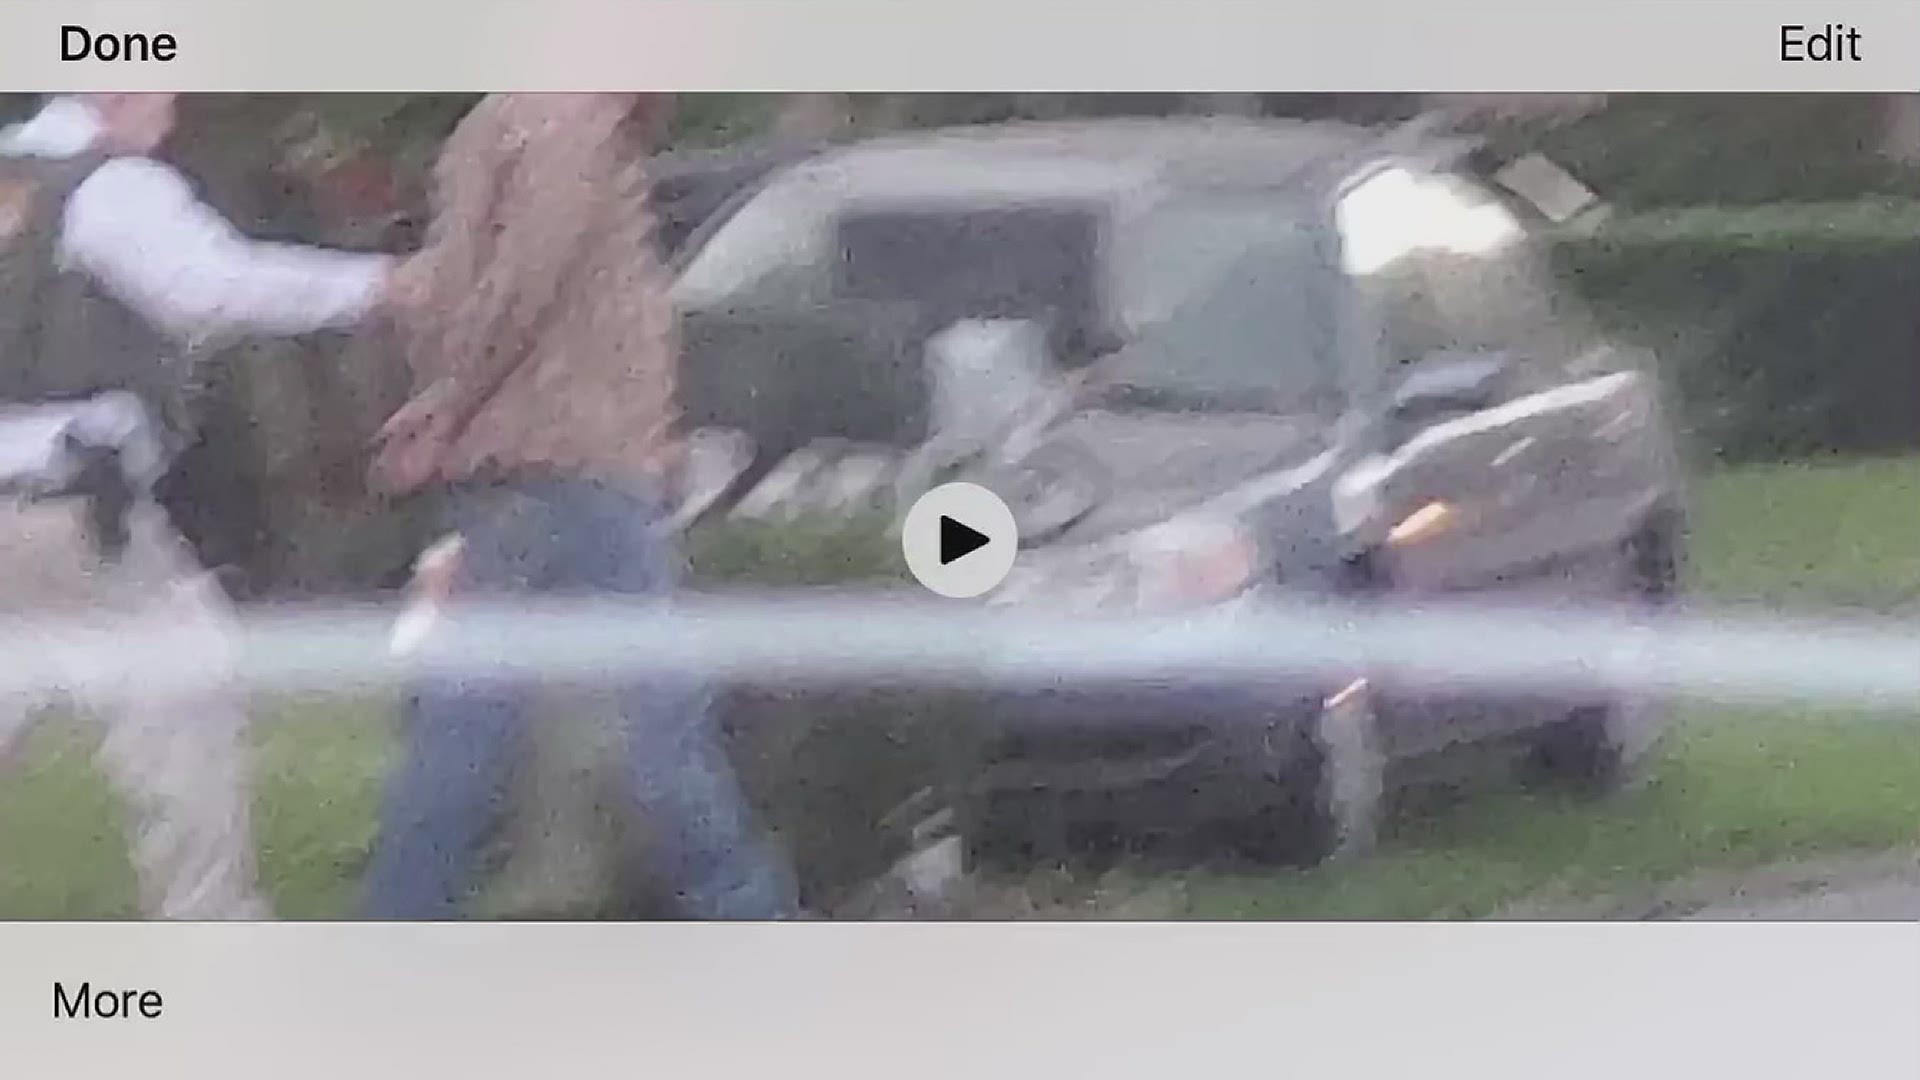 A neighbor caught the moment Gregory McMichael and Travis McMichael were arrested for murder in the death of Ahmaud Arbery.